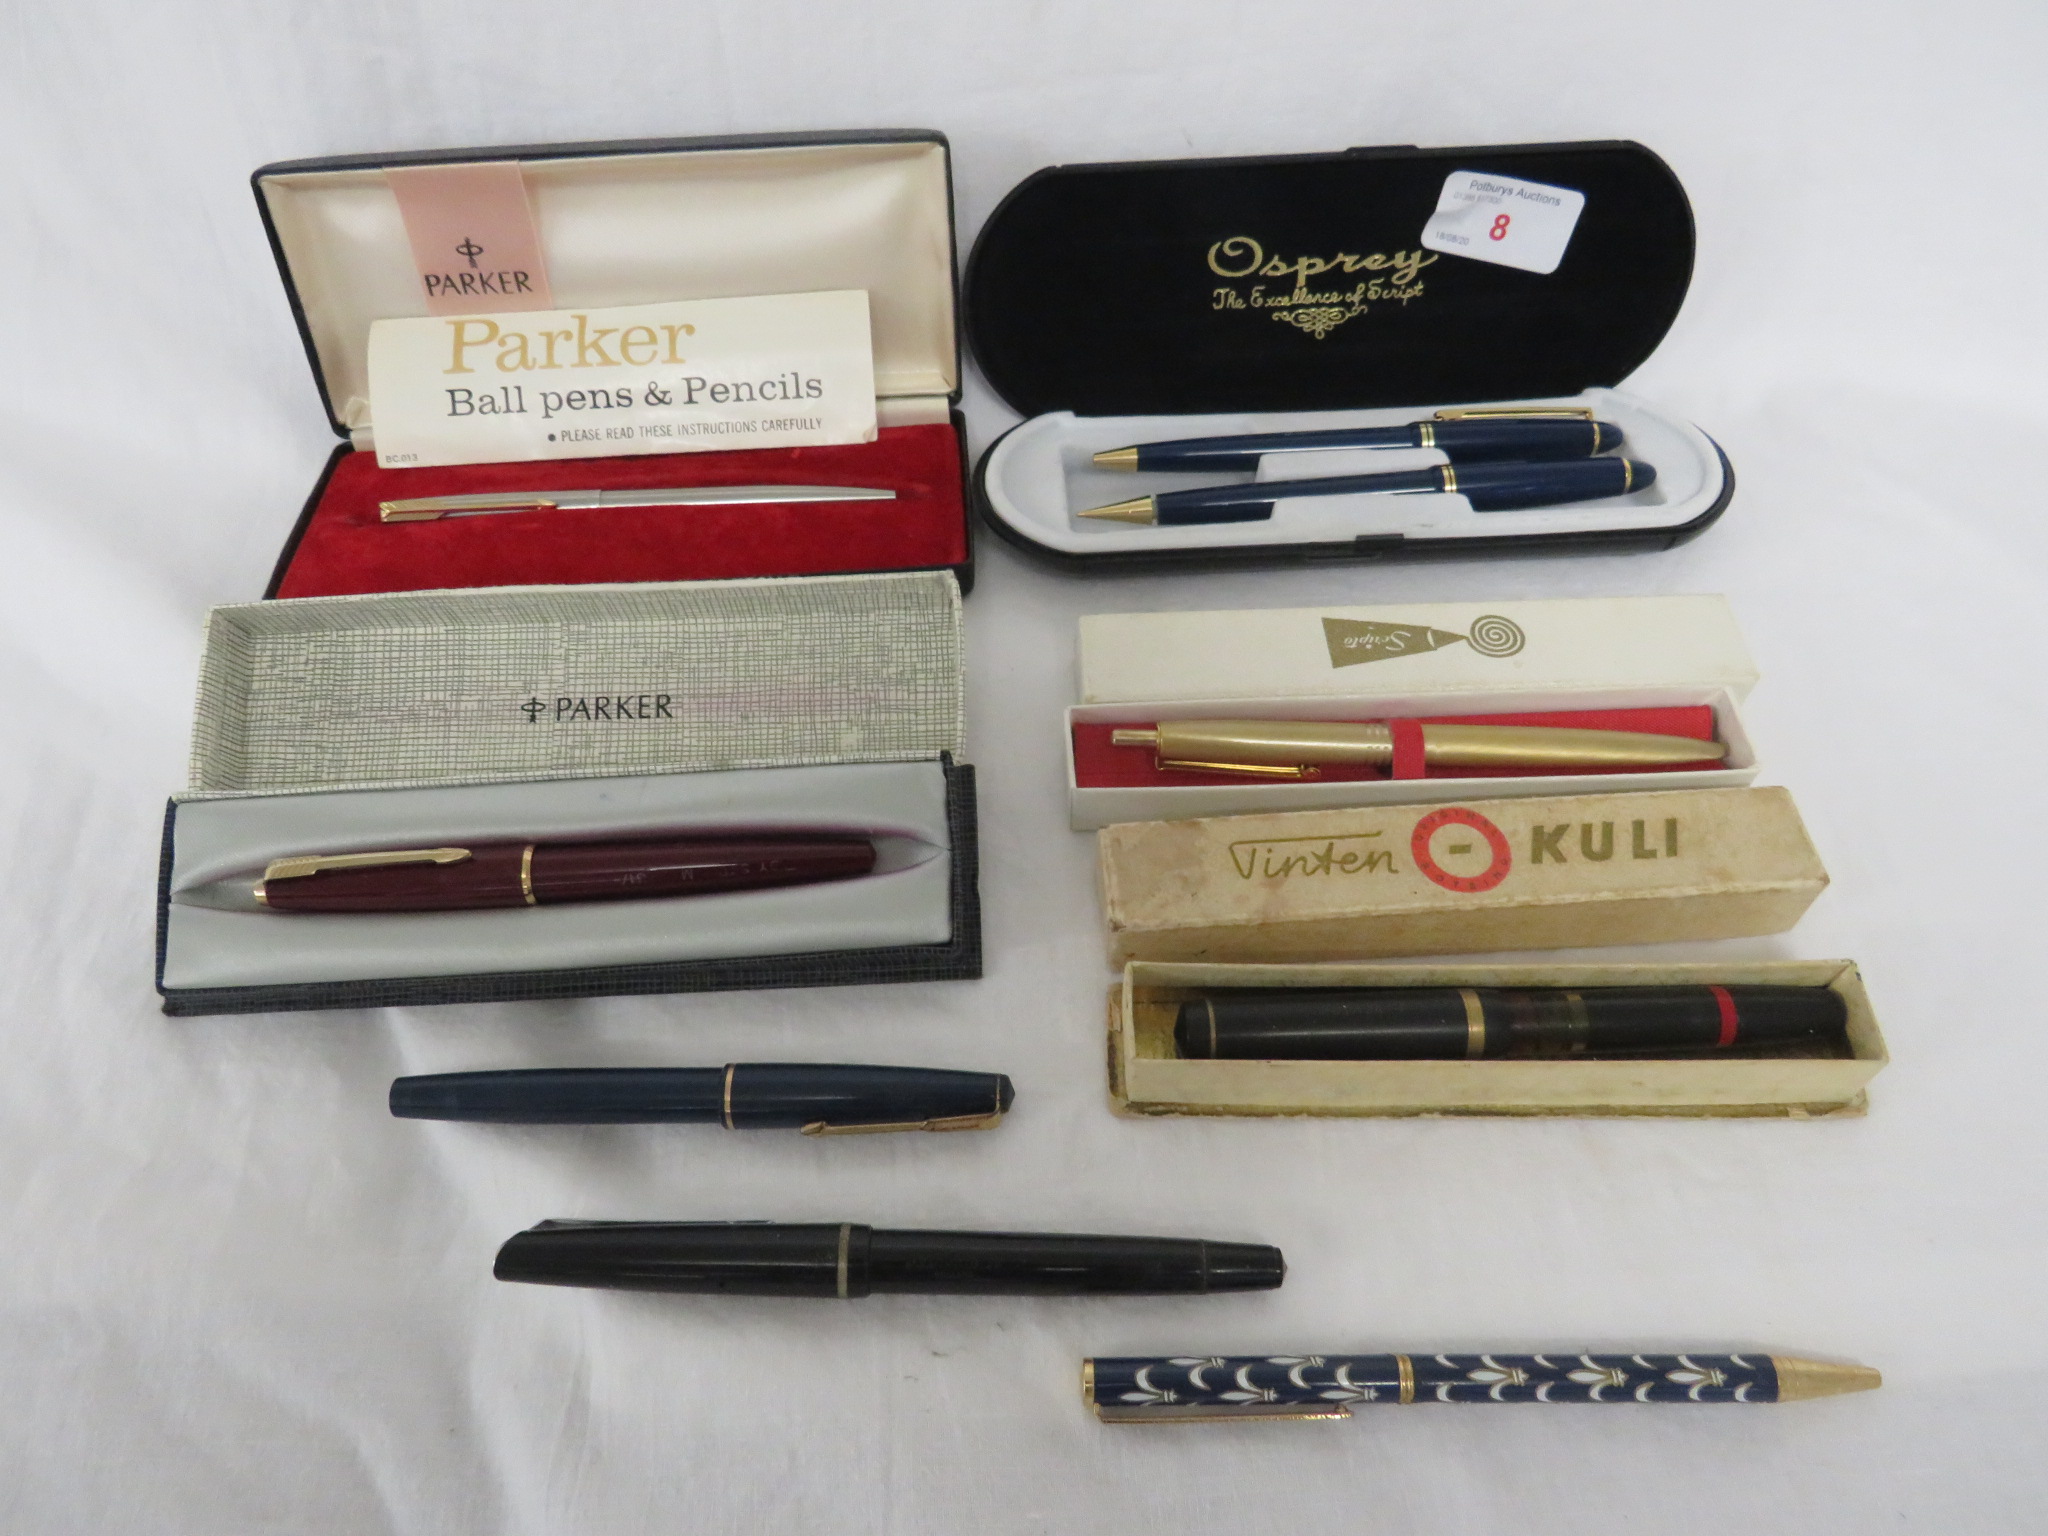 BOXED BALLPOINT PENS AND FOUNTAIN PEN INCLUDING PARKER WITH OTHER LOOSE PENS